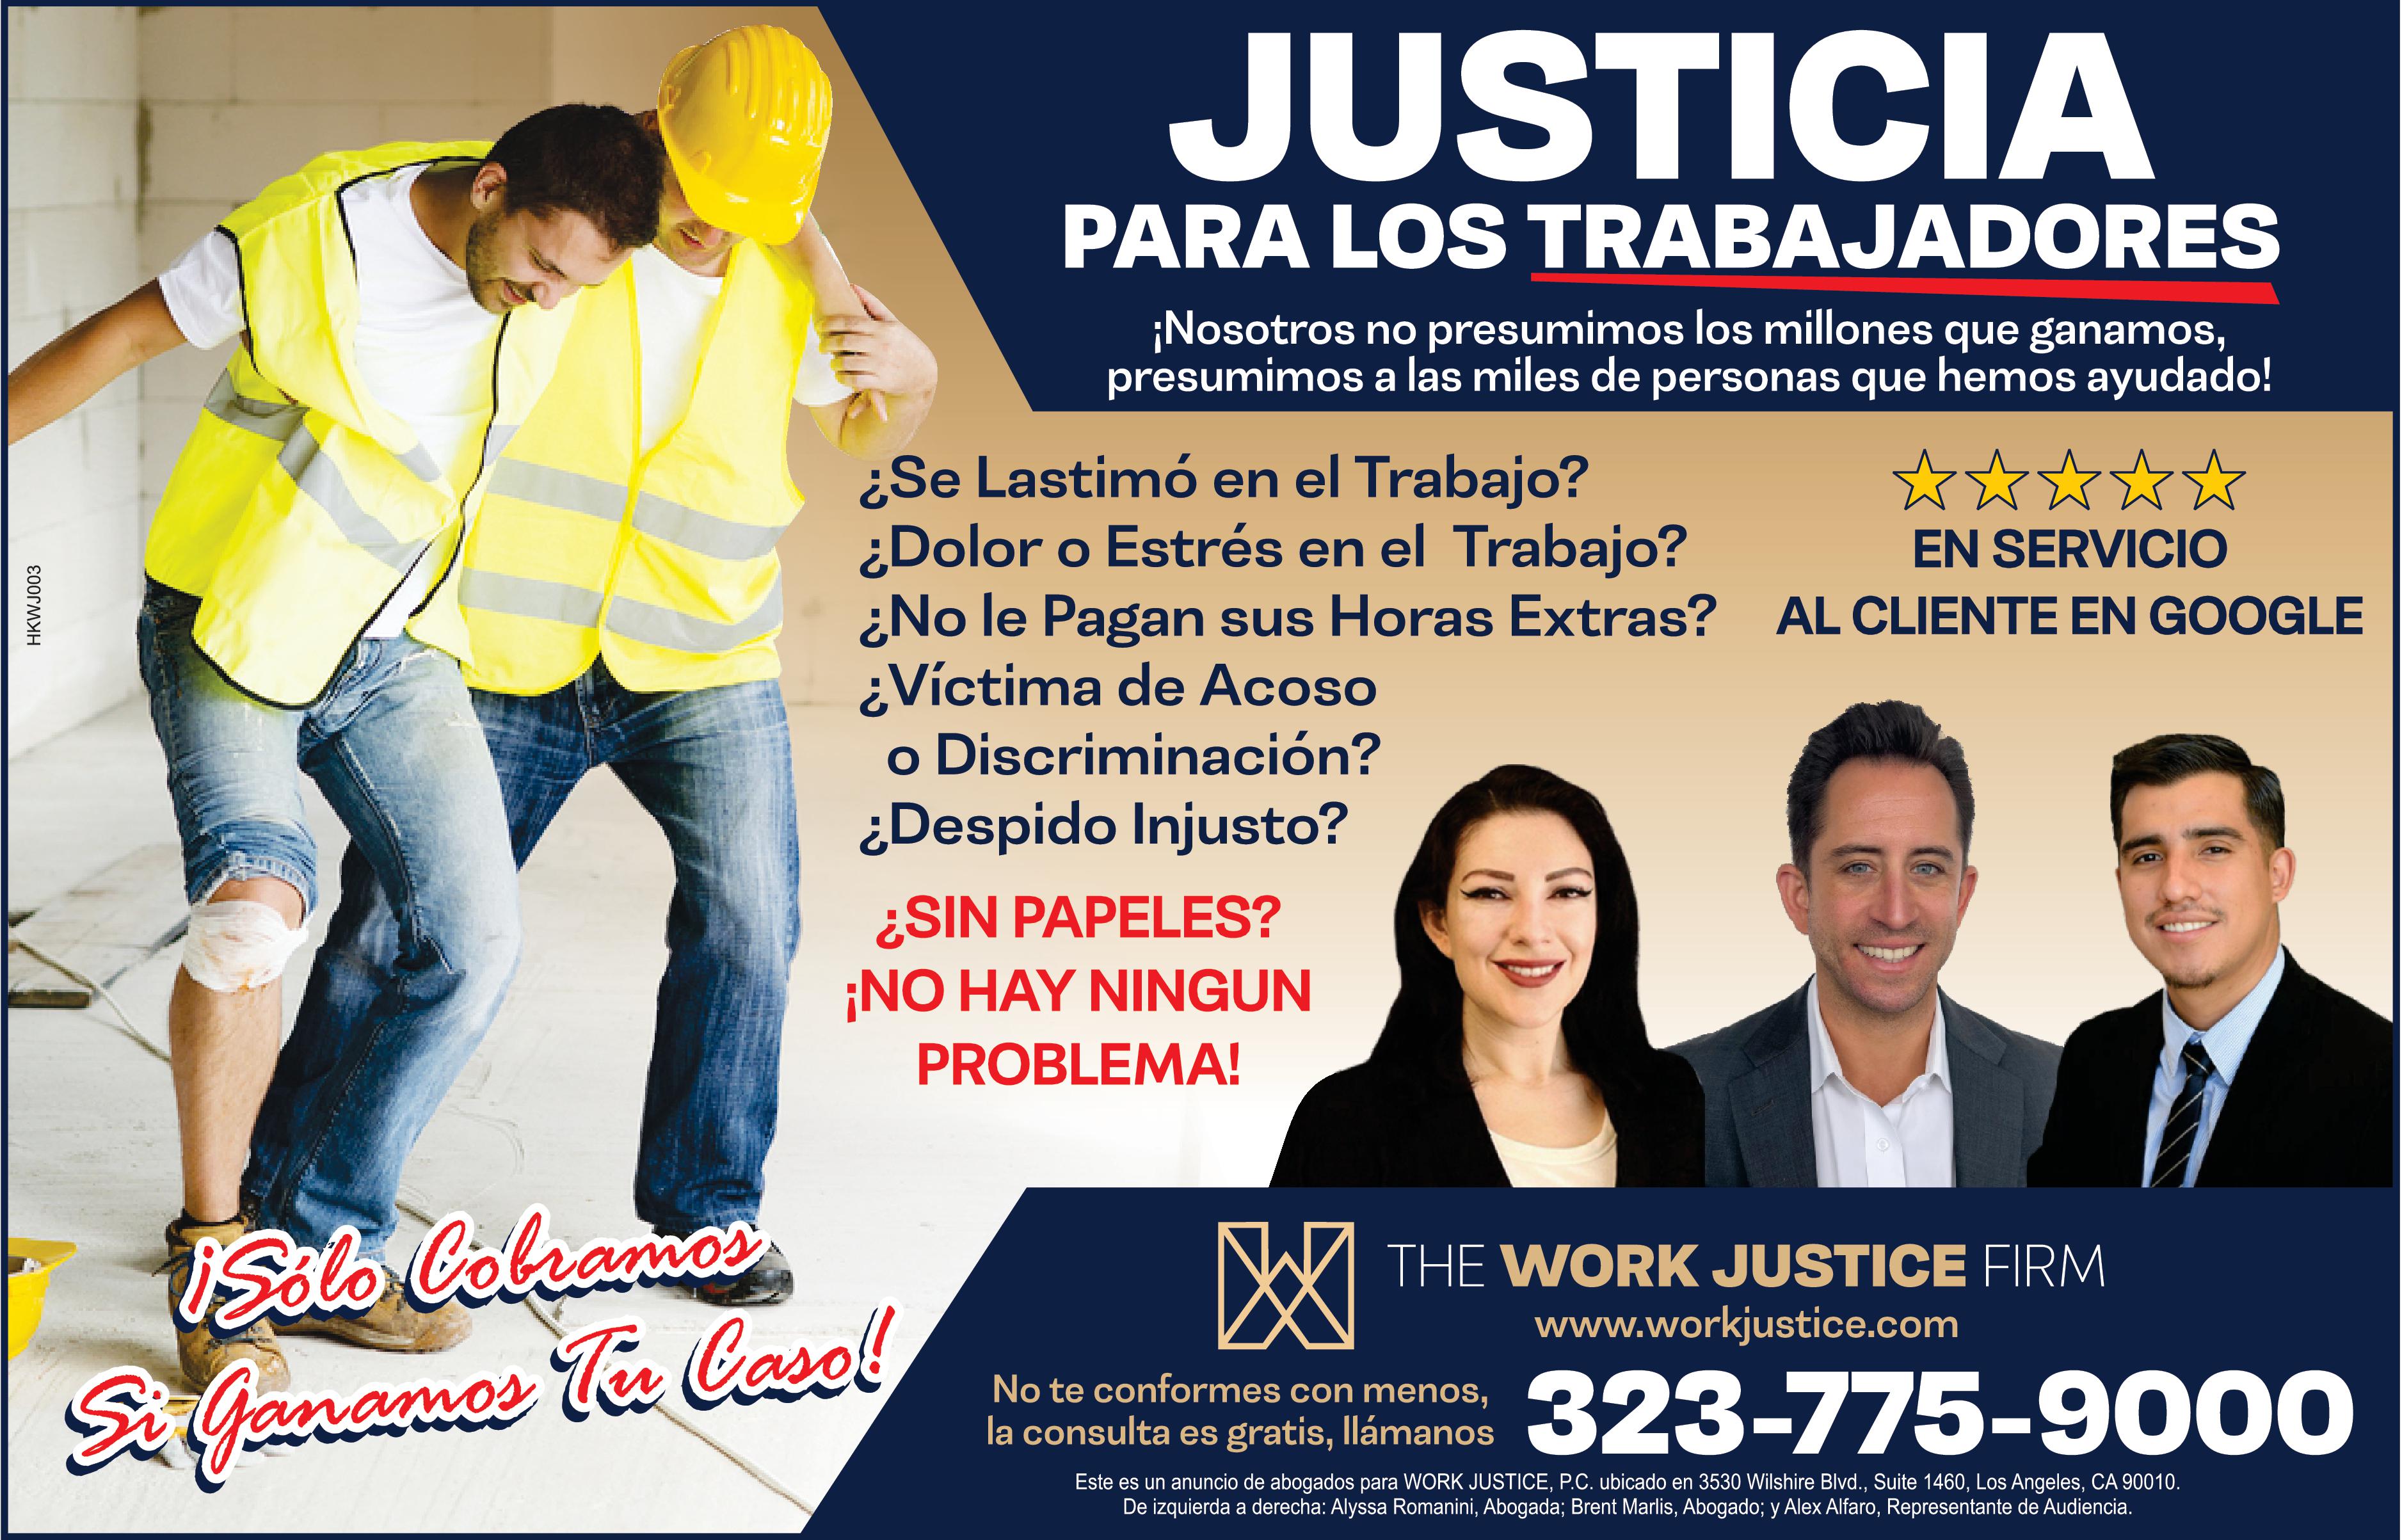 The Work Justice Firm